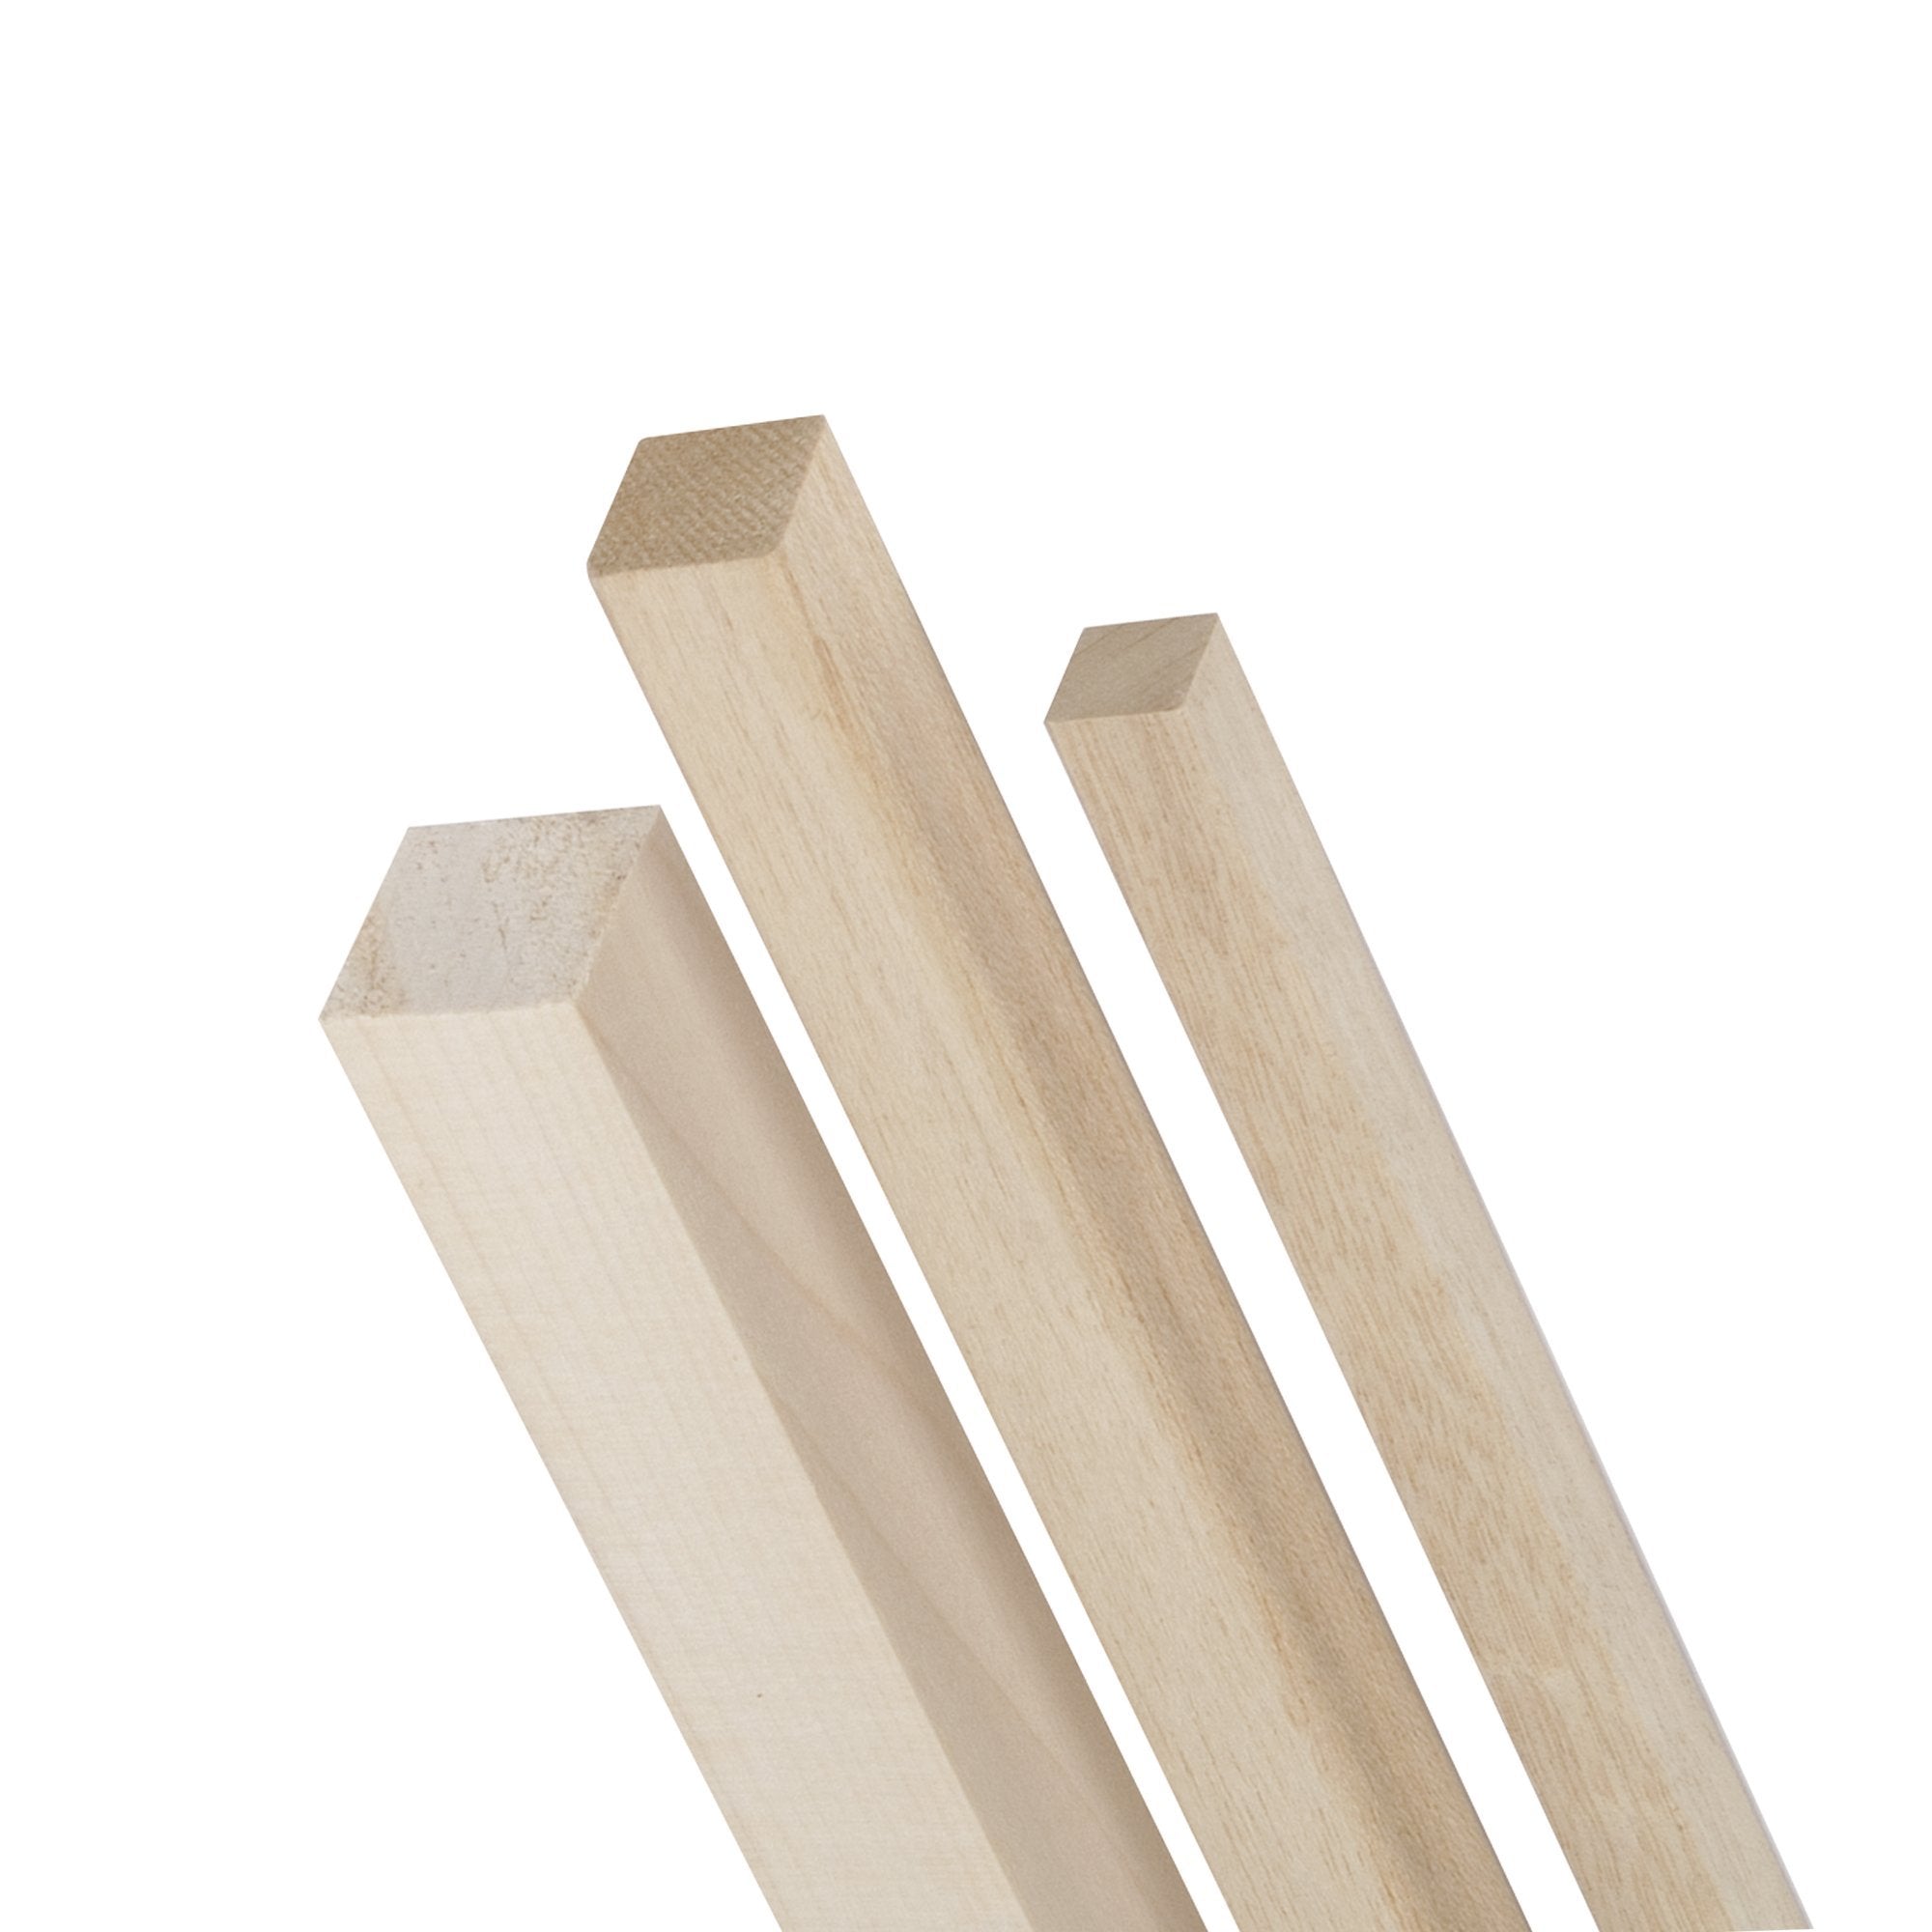 Waddell 3/4 In. x 36 In. Square Hardwood Dowel Rod - Gillman Home Center